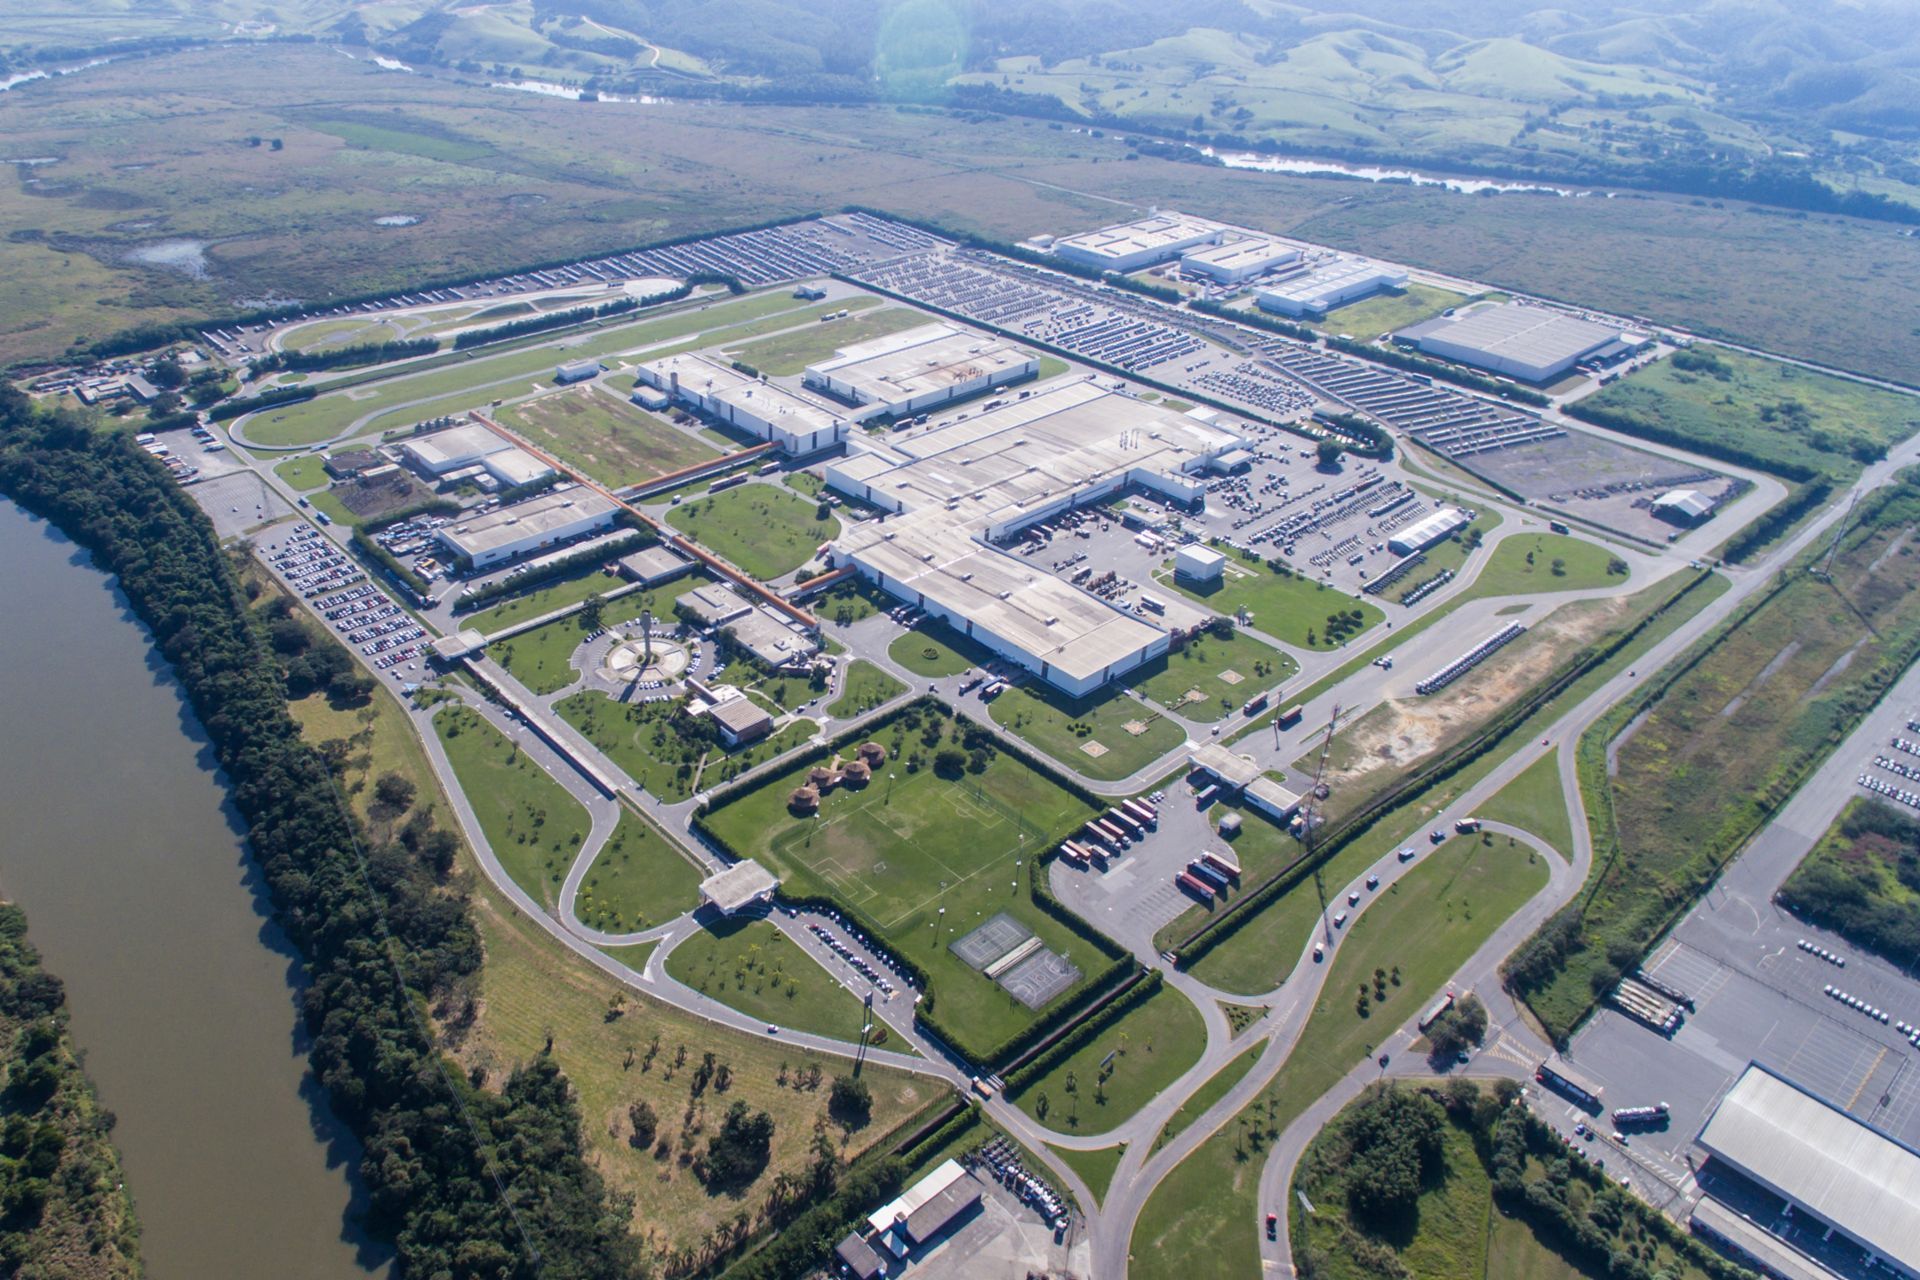 Overview of VWCO factory in Resende, Brazil, where it holds the world development center for VW trucks and buses.
                 